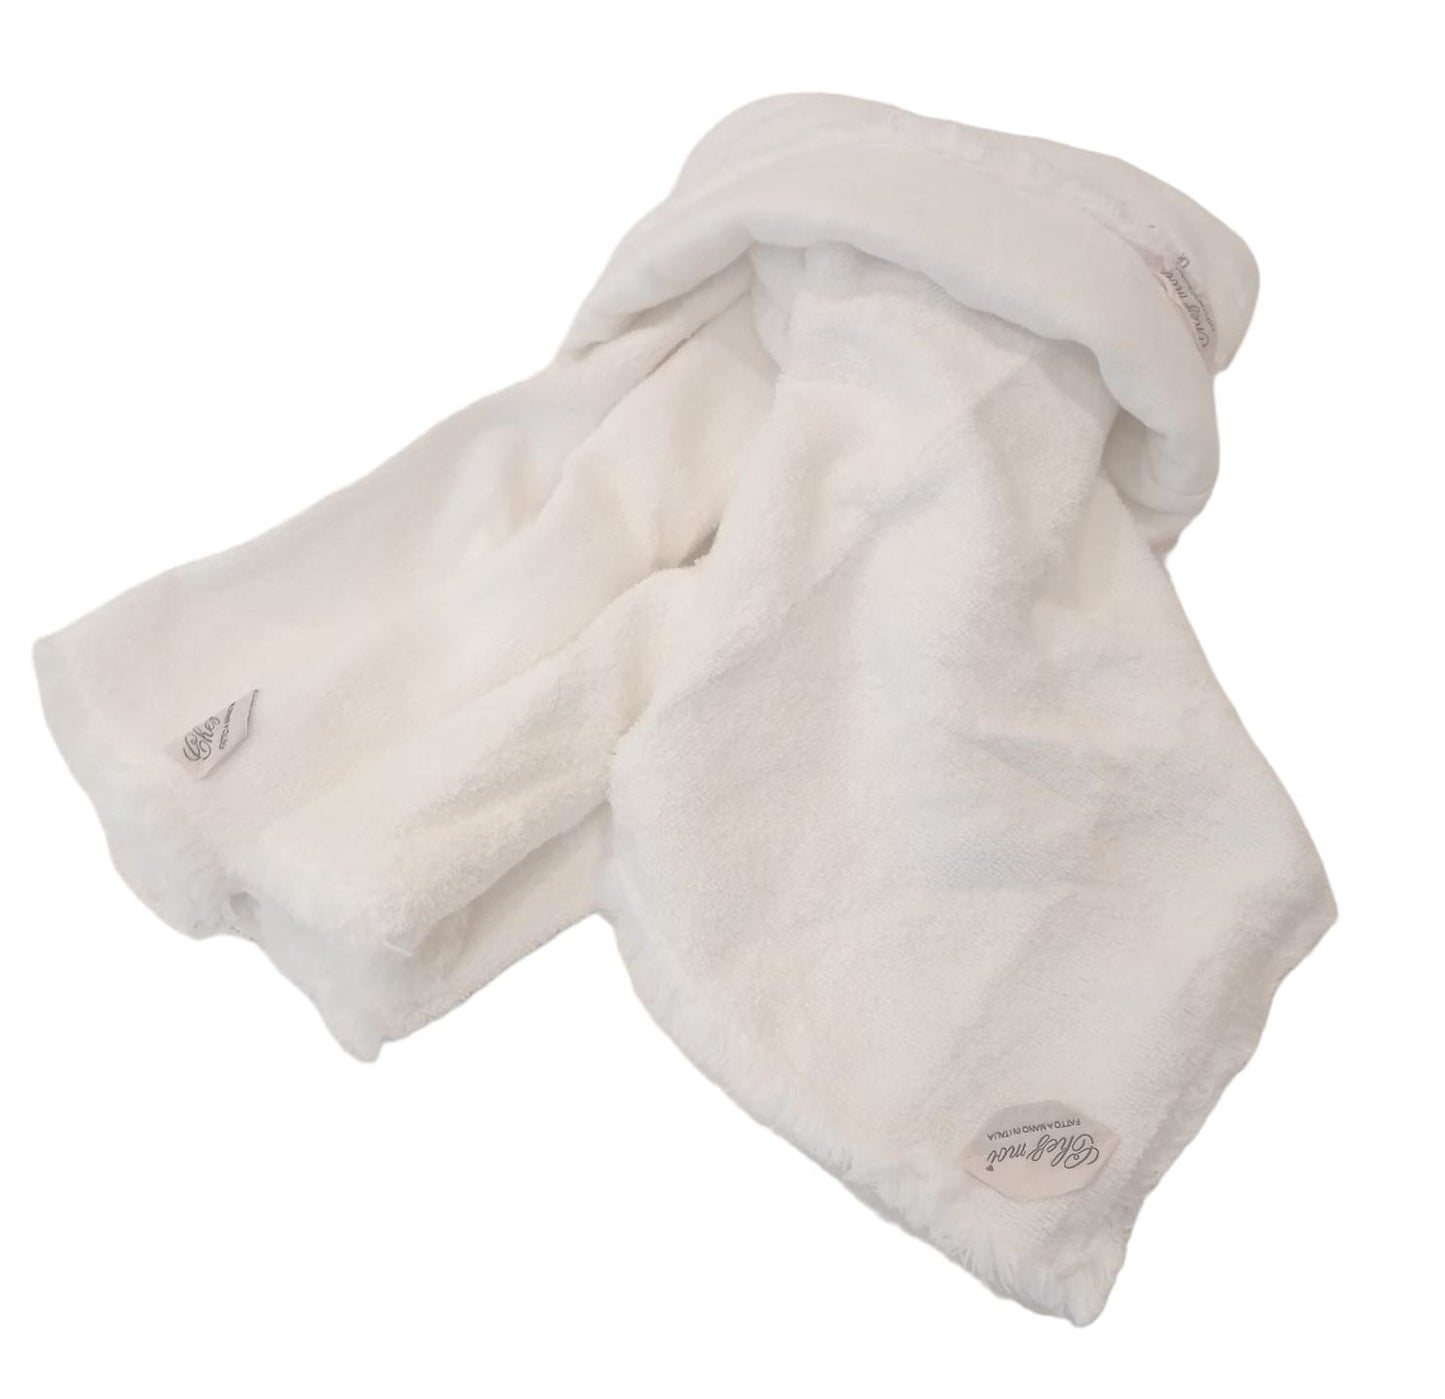 Lavette set of 3 bath towels with elegant linen bag, colour: White, fine fabrics, 100% Made in Italy - Chez Moi